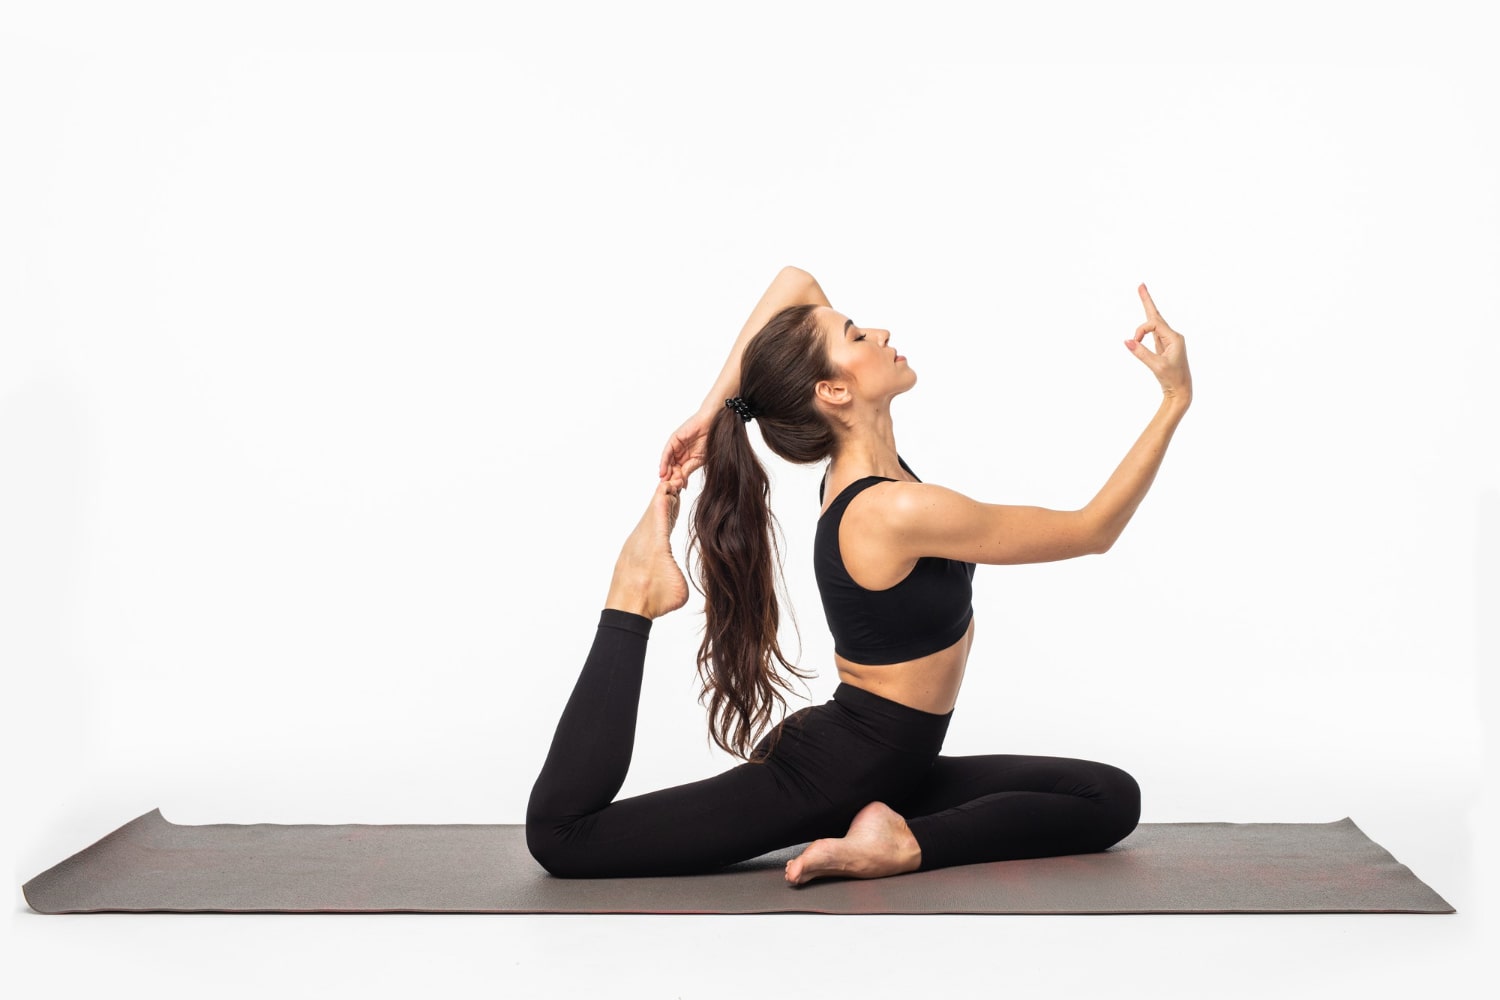 The Best Hatha Yoga Poses for a 60-Minute Beginner Class